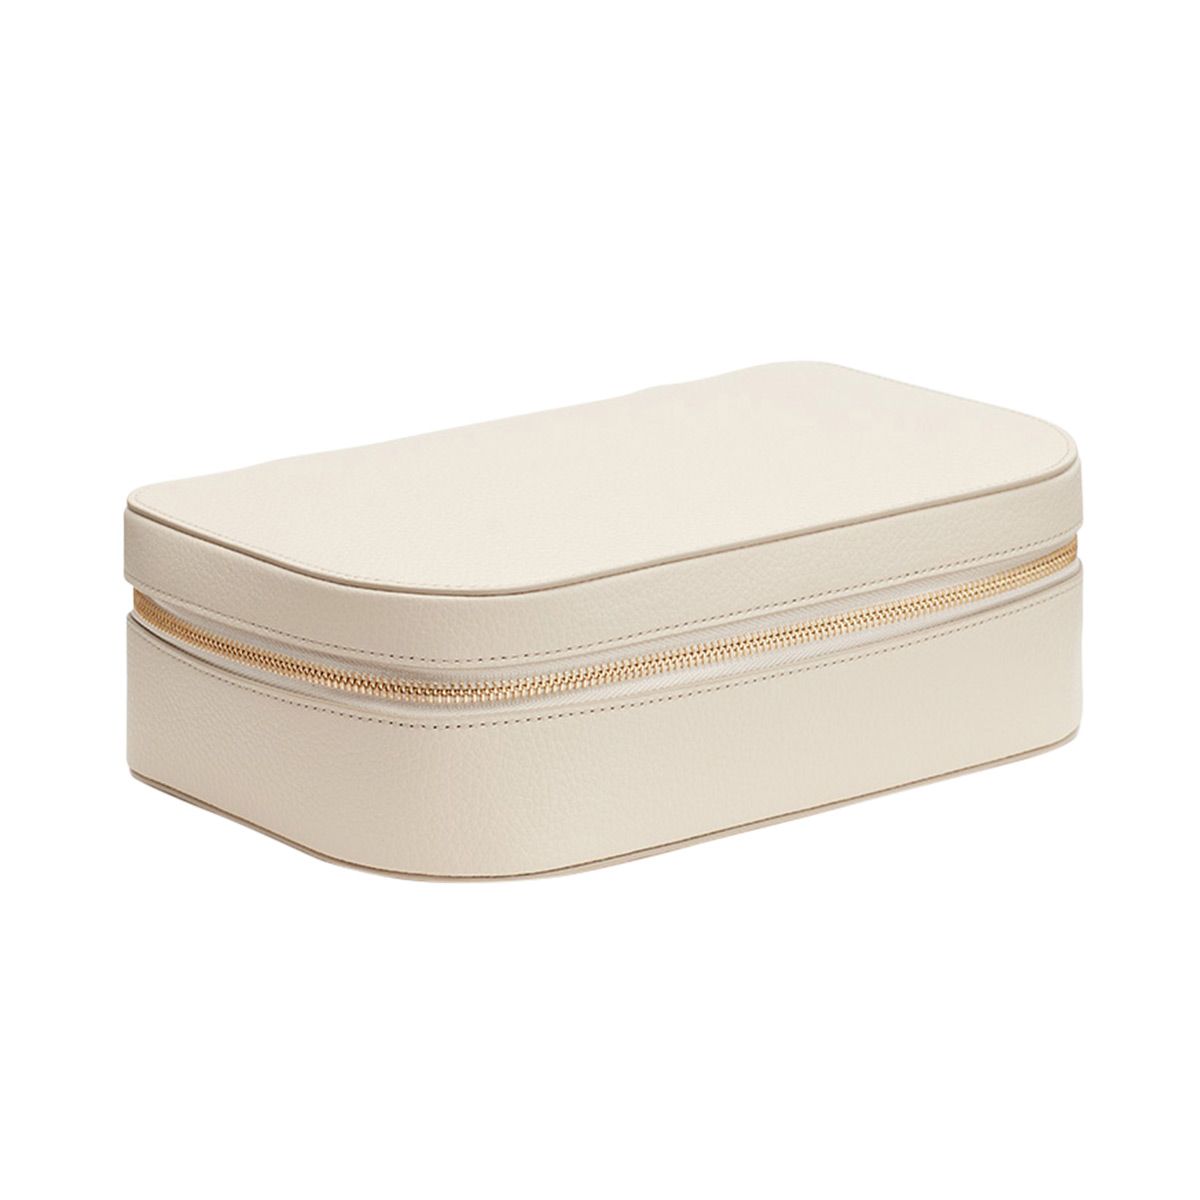 Cuyana Travel Beauty Case | The Container Store